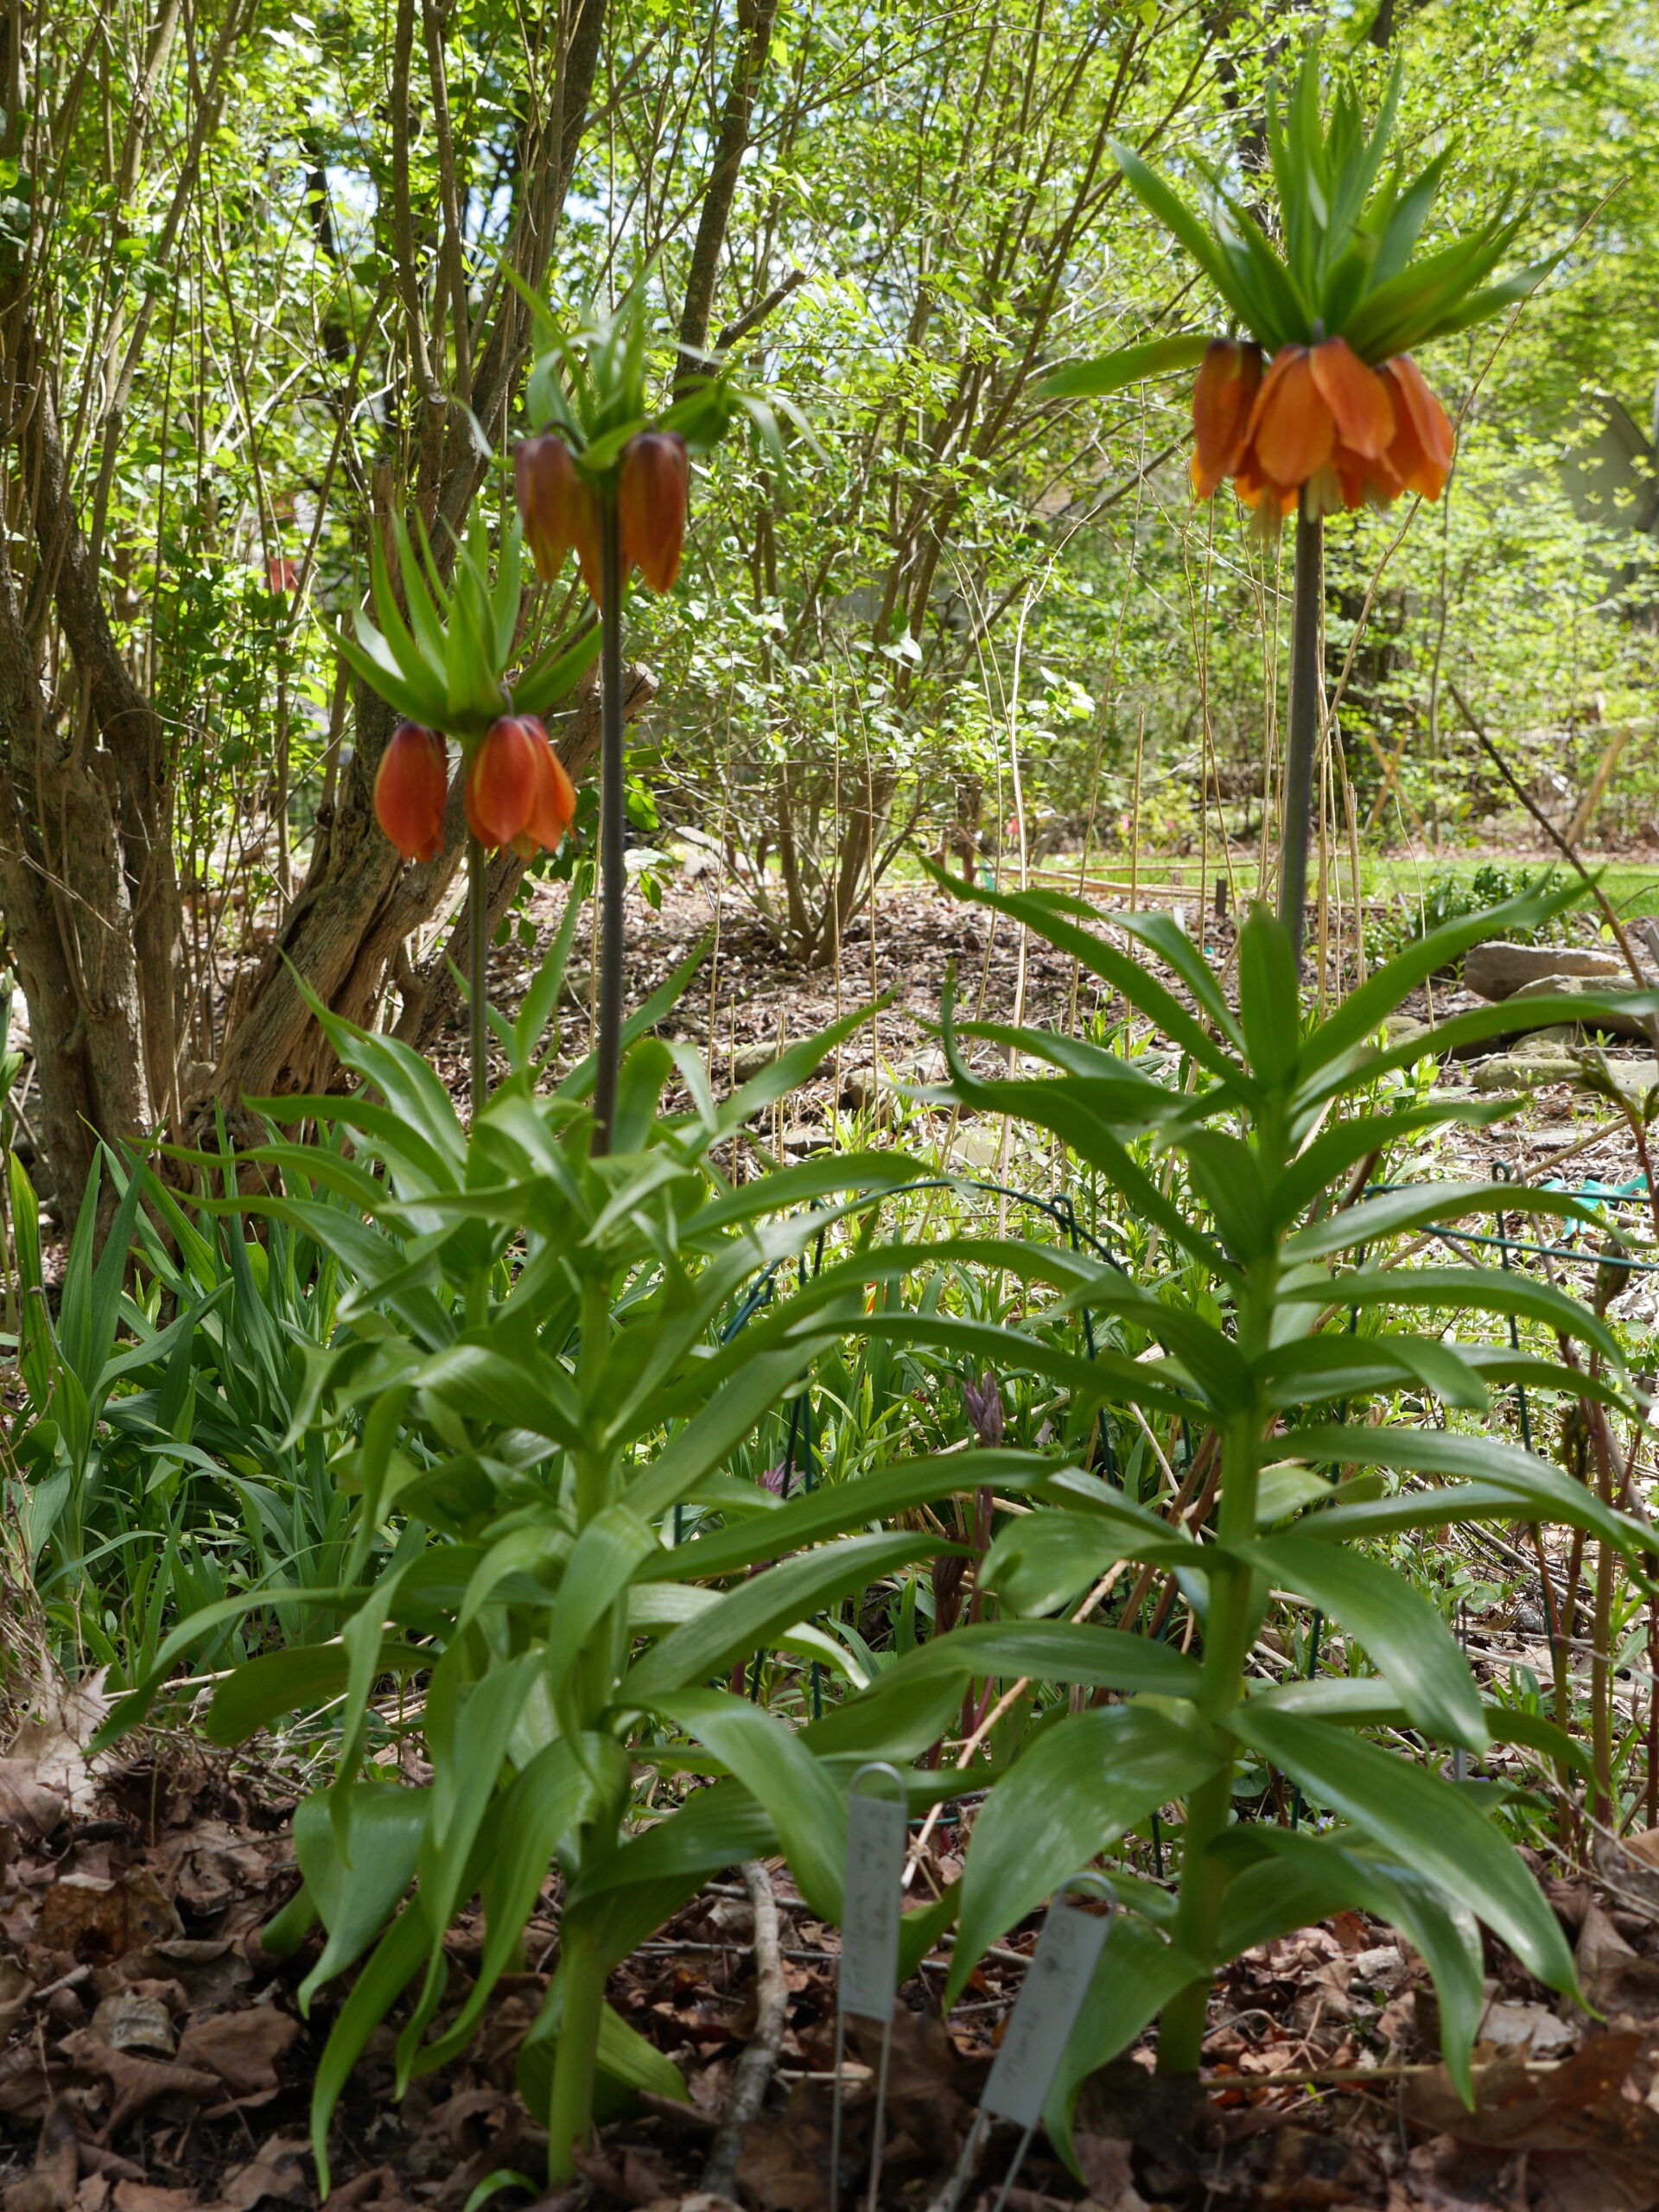 Fritillaria imperialis blooms early in the spring and is an effective deer repellent when in flower. However, the plant is also the alternate host for the scarlet lily beetle so keep this plant as far as possible from any hardy lilies in your garden.
ANDREW MESSINGER